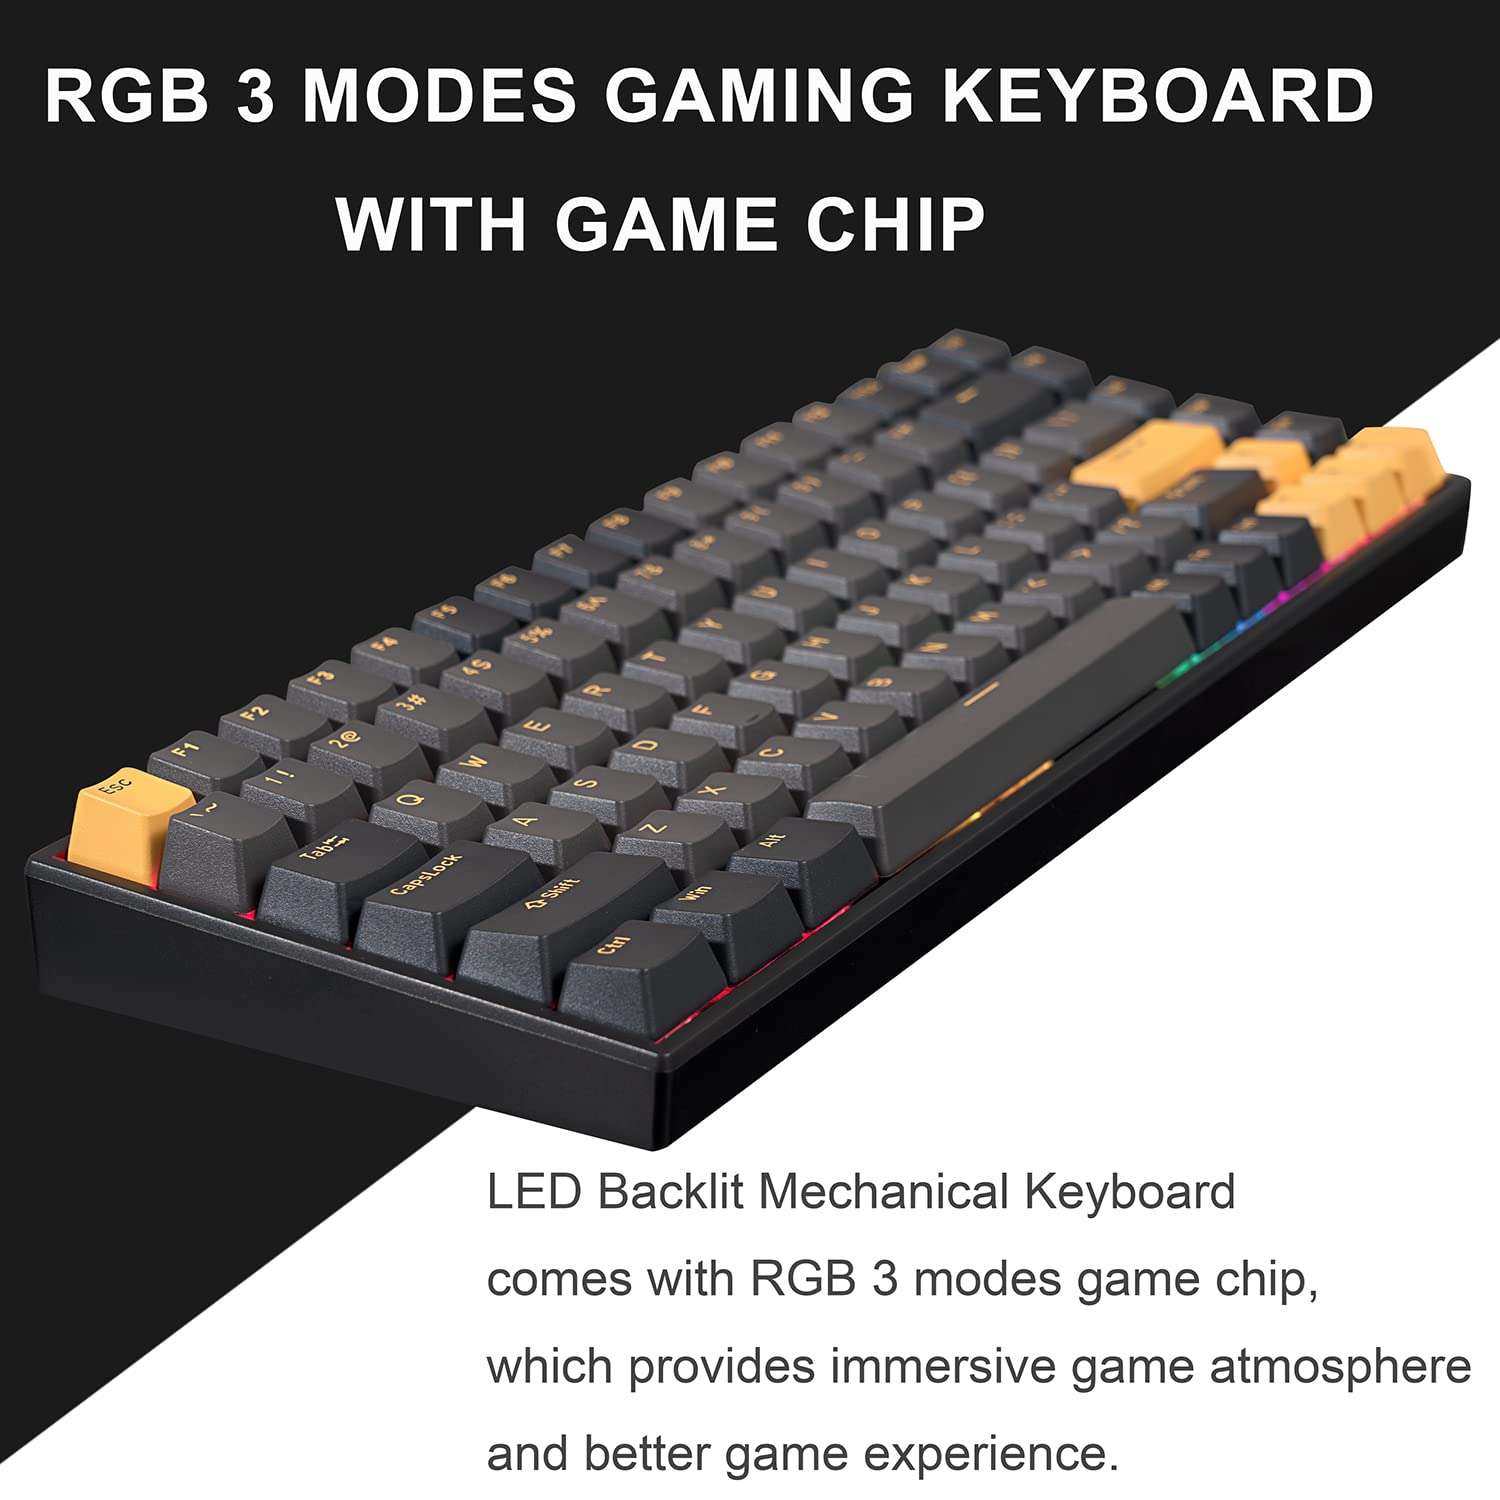 ONE METER 75% Wireless Mechanical Keyboard, Hot Swappable Mechanical Gaming Keyboard with Gateron G-Pro Switch and PBT Keycaps RGB LED Backlit